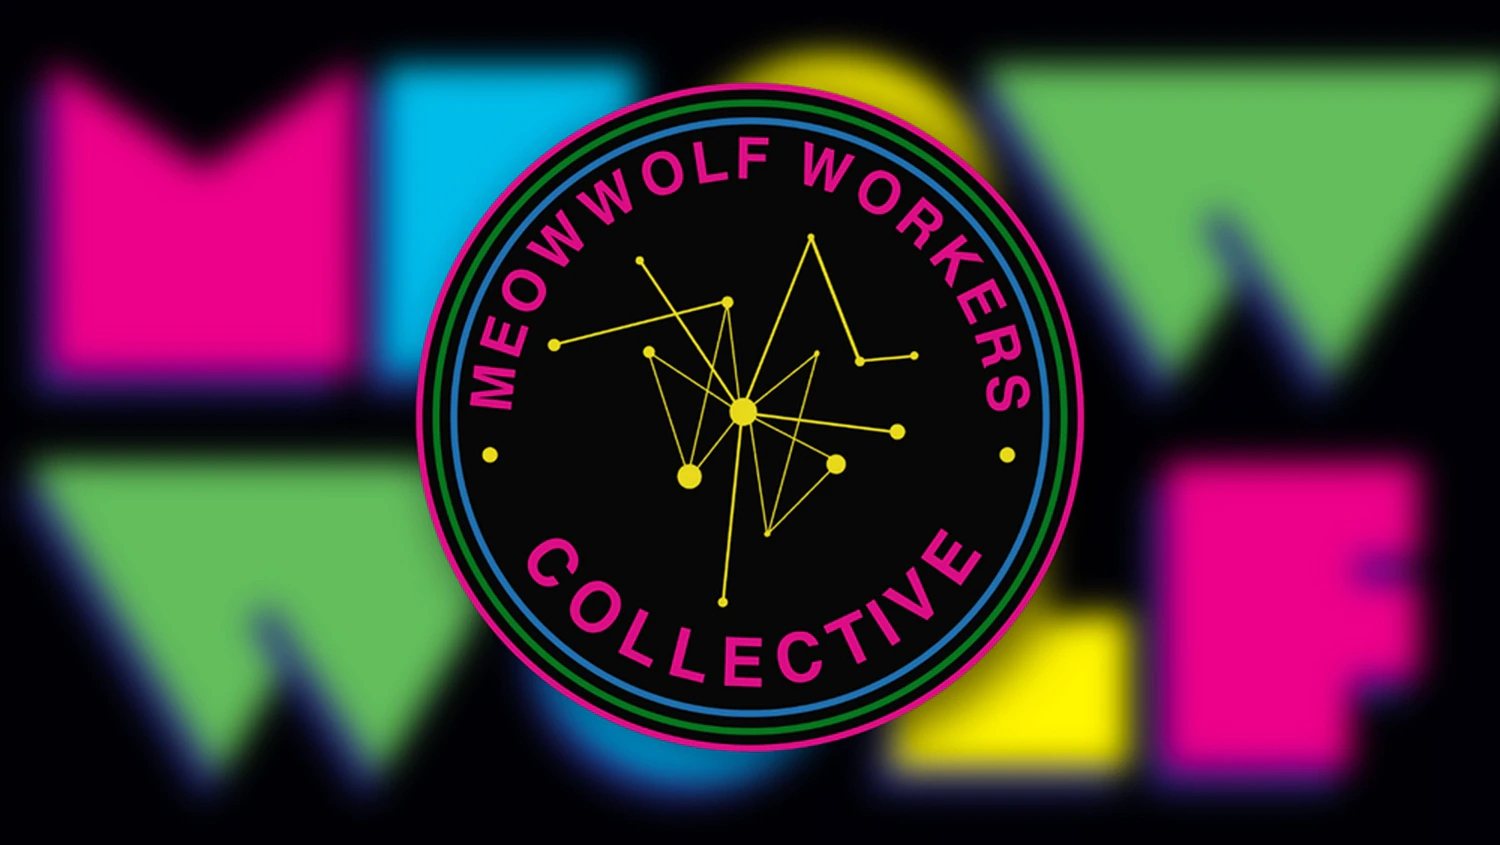 Meow Wolf's Santa Fe Workers Want to Unionize, But the Company Says Its